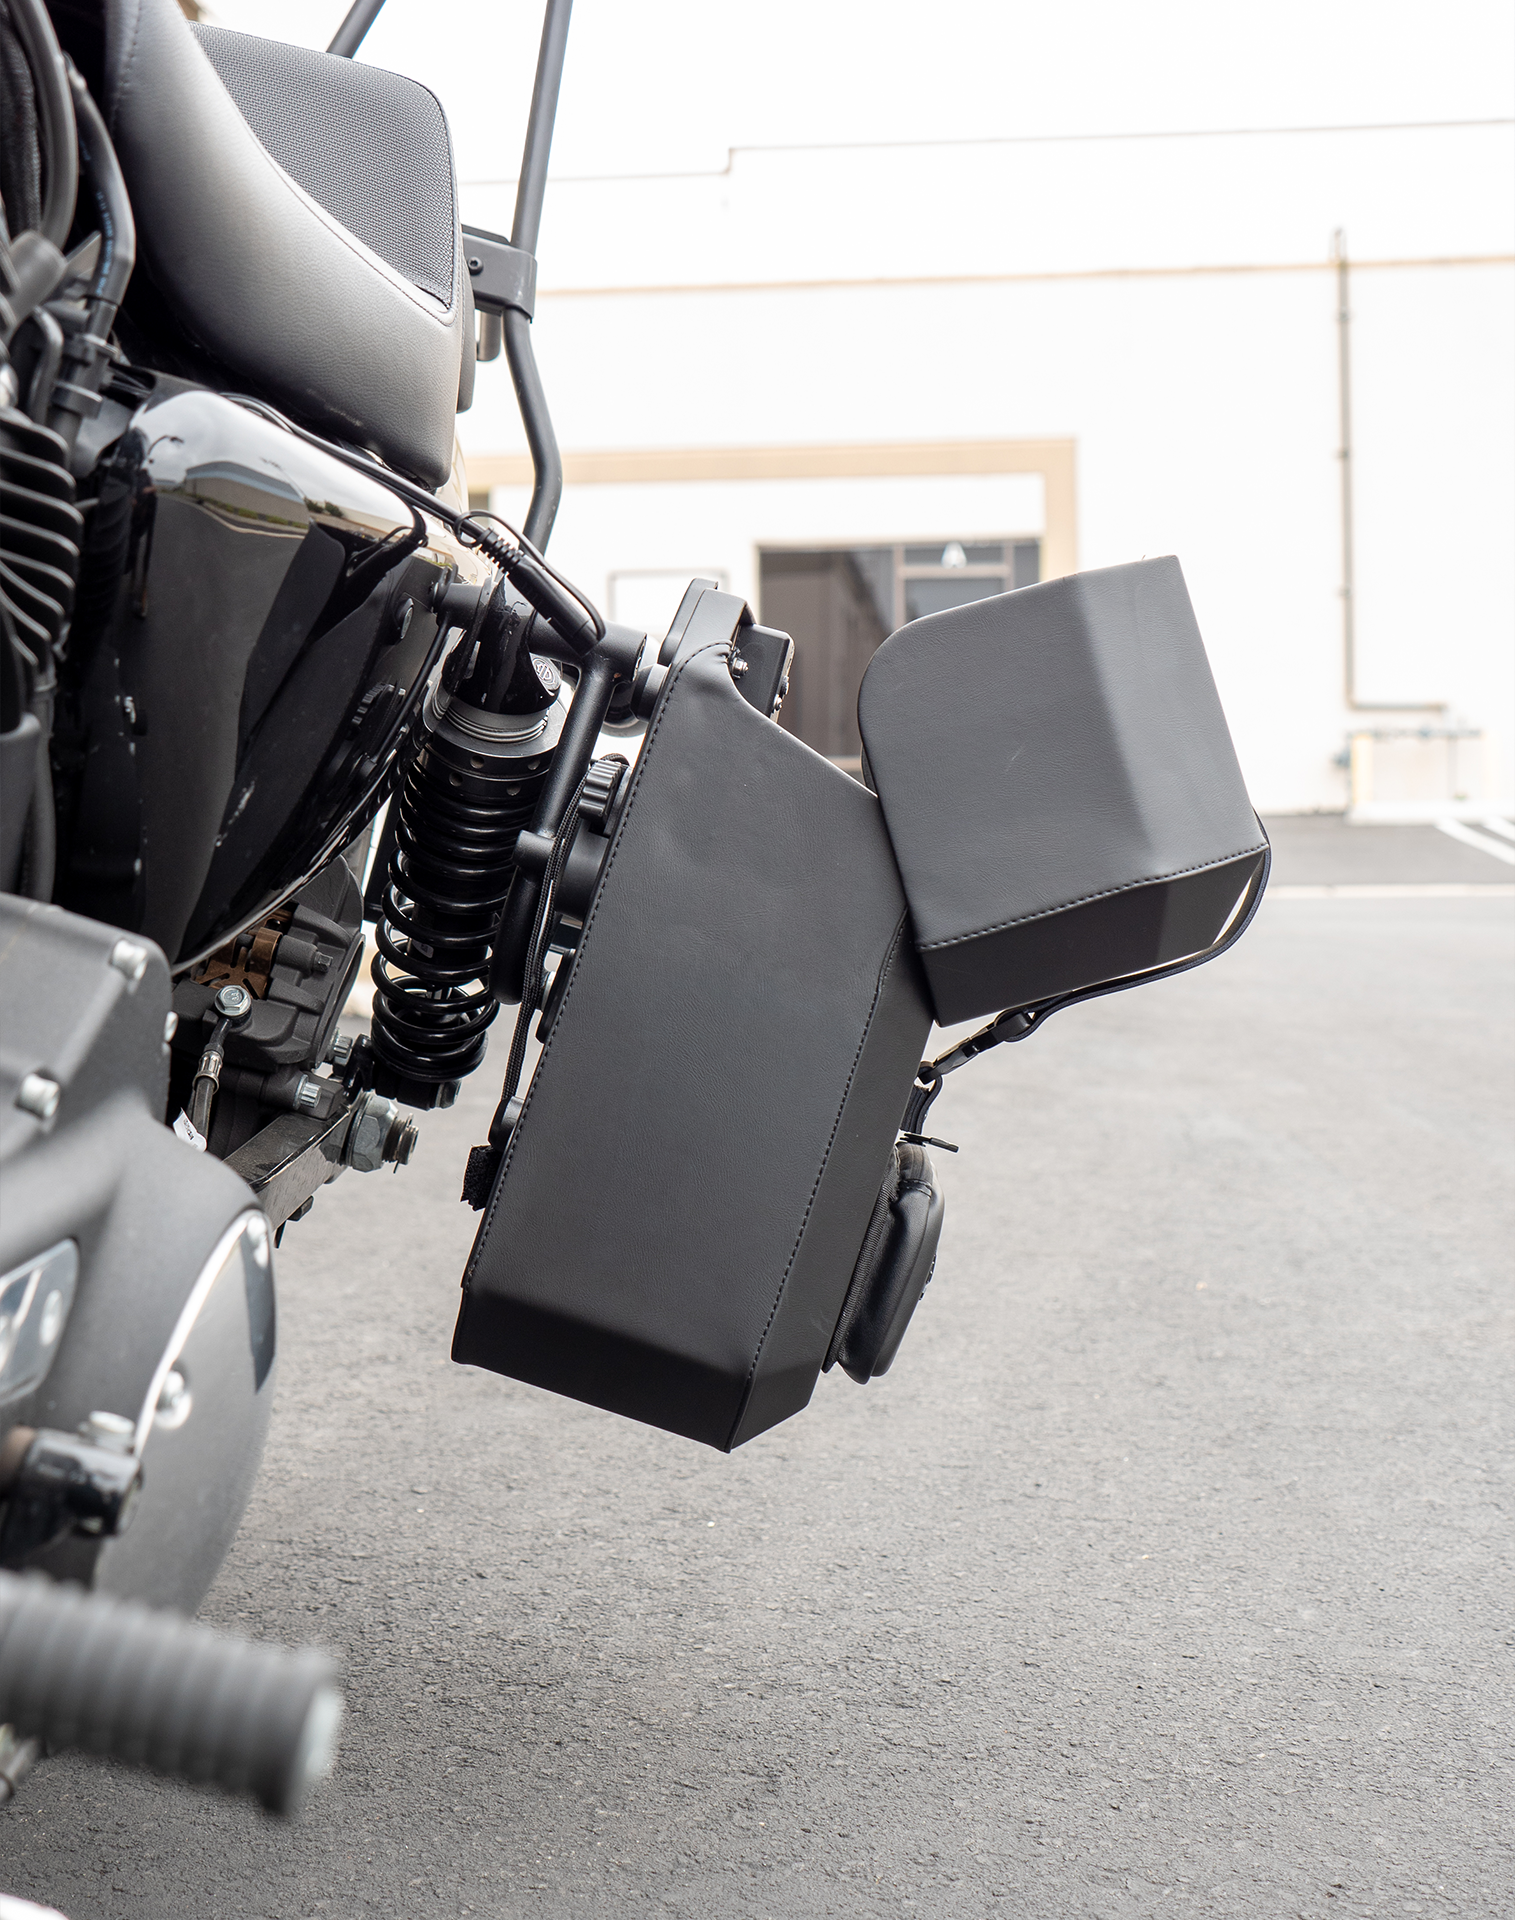 15L - Outlaw Quick Mount Medium Harley Sportster Forty Eight 48 Hard Solo Saddlebag (Left Only)